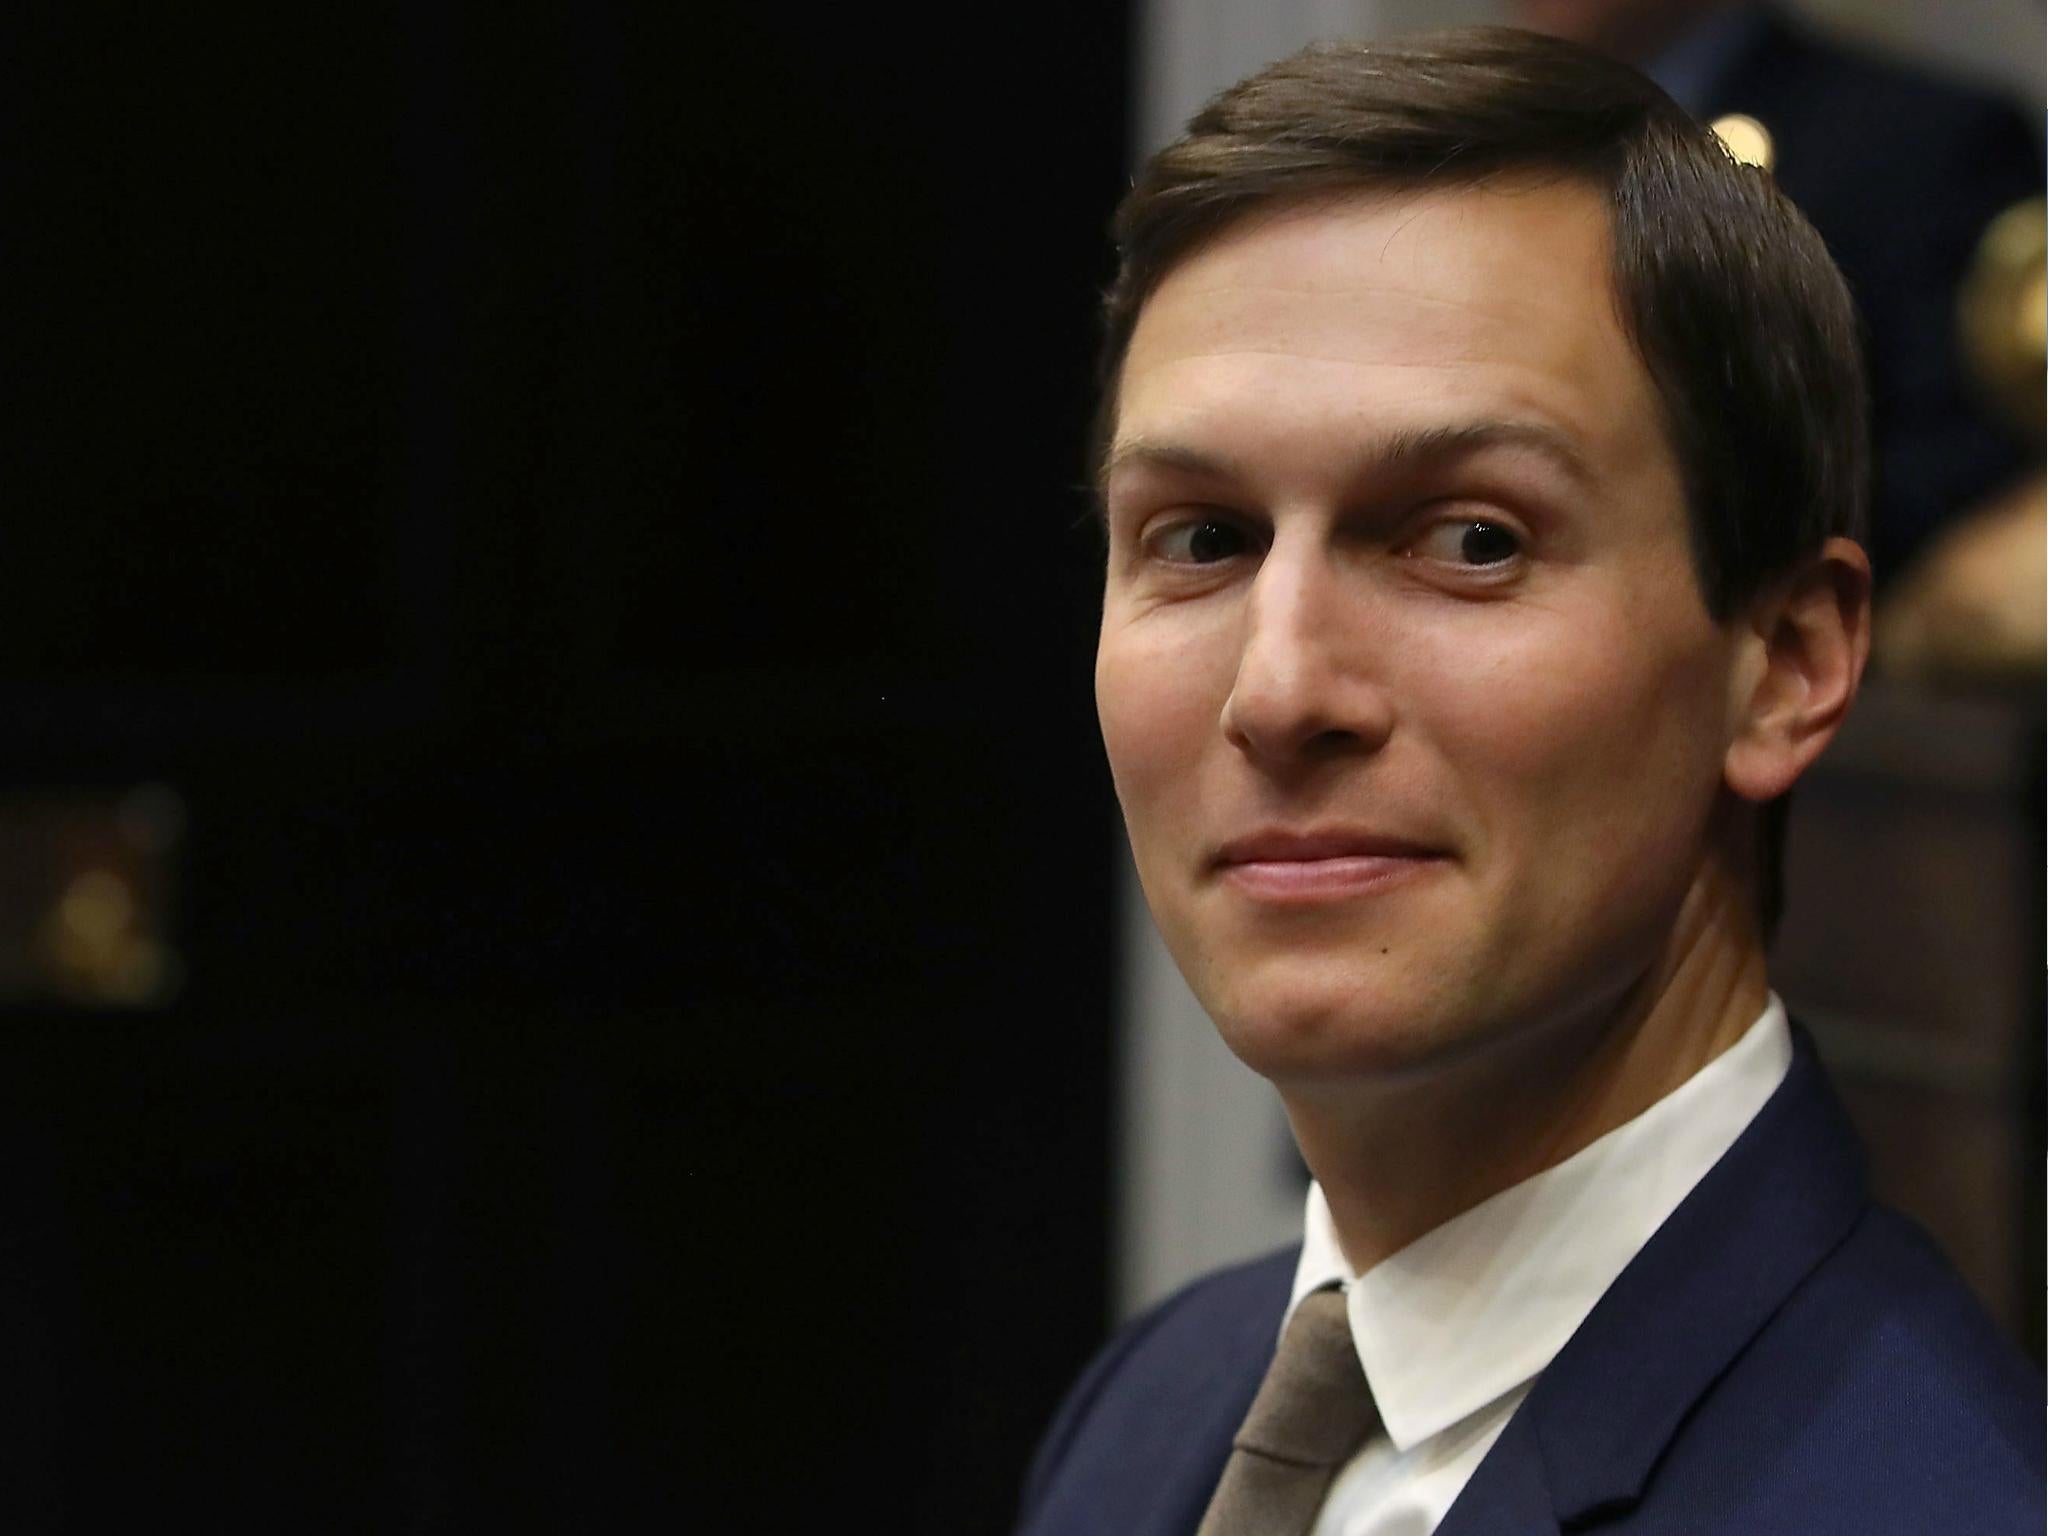 White House adviser and son-in-law of US President Donald Trump, Jared Kushner has had his security clearance downgraded.